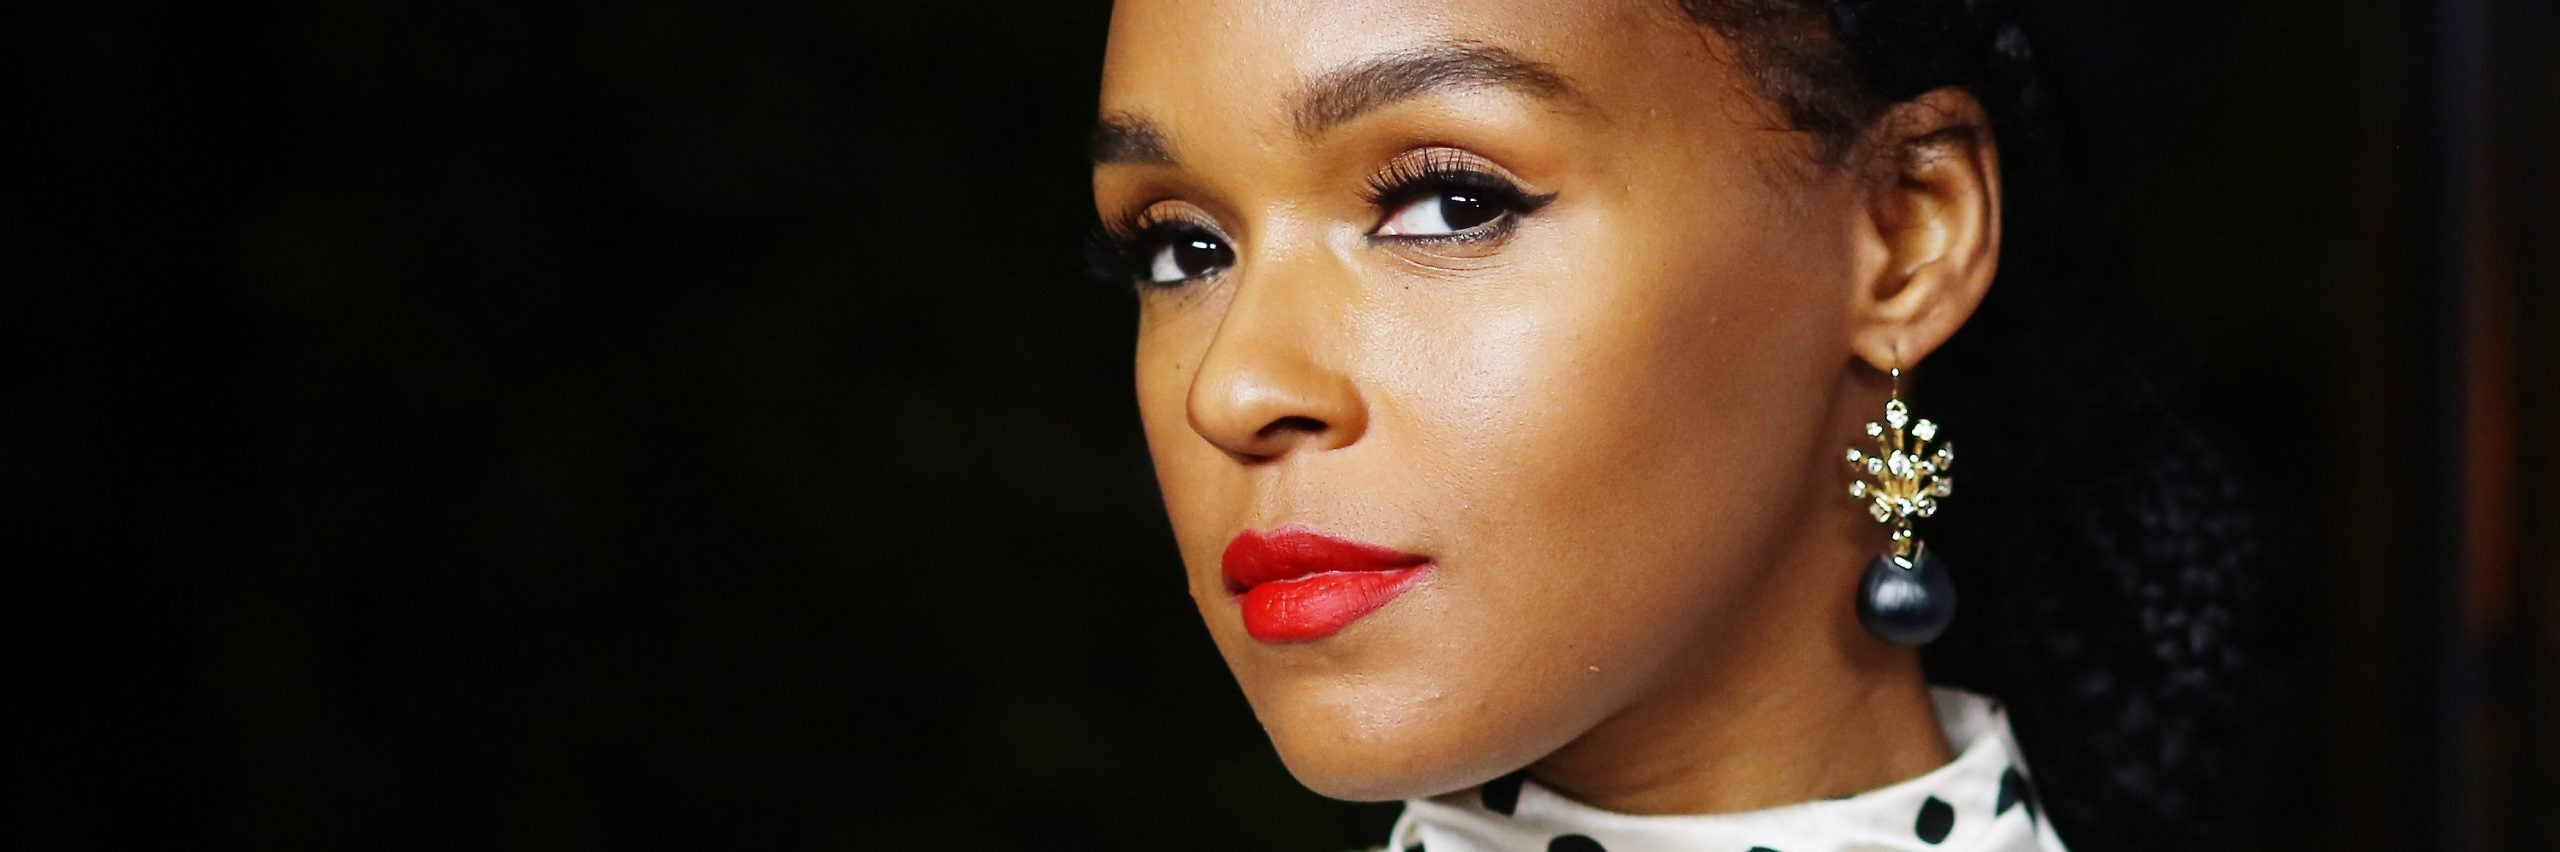 Janelle Monáe On Embracing Her Limits: "I Have To Take Care Of My Body"